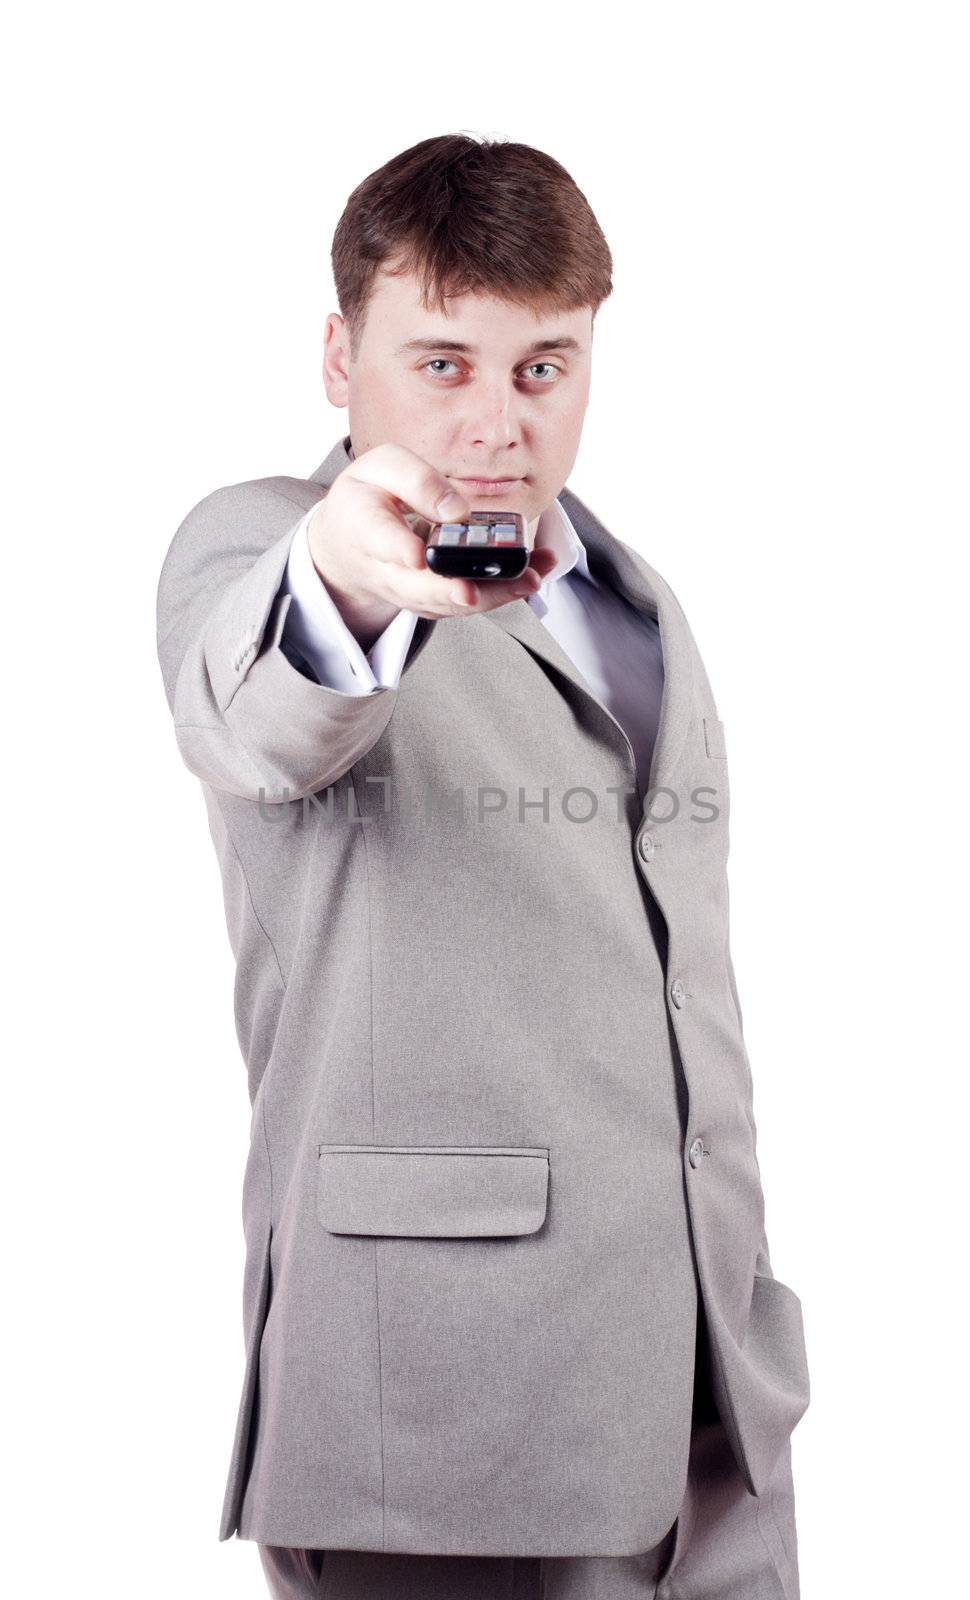 Man with remote control on a white background